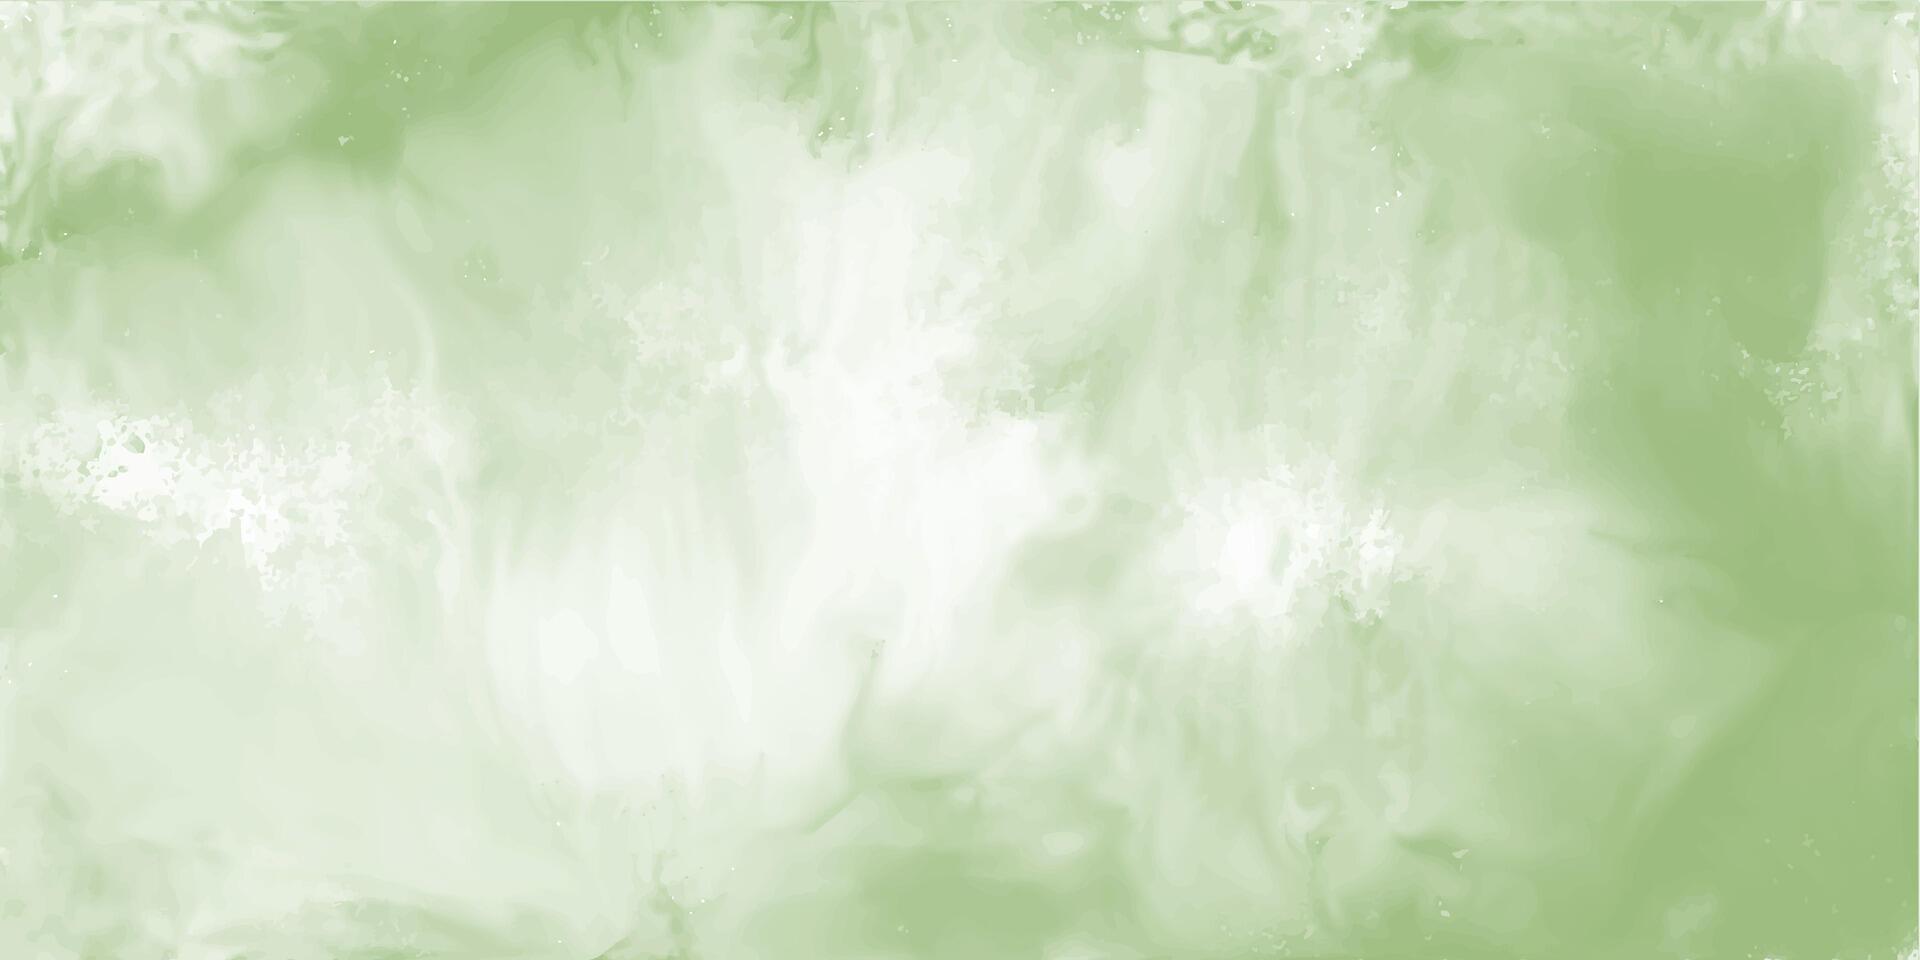 natural green hand painted watercolor texture background vector